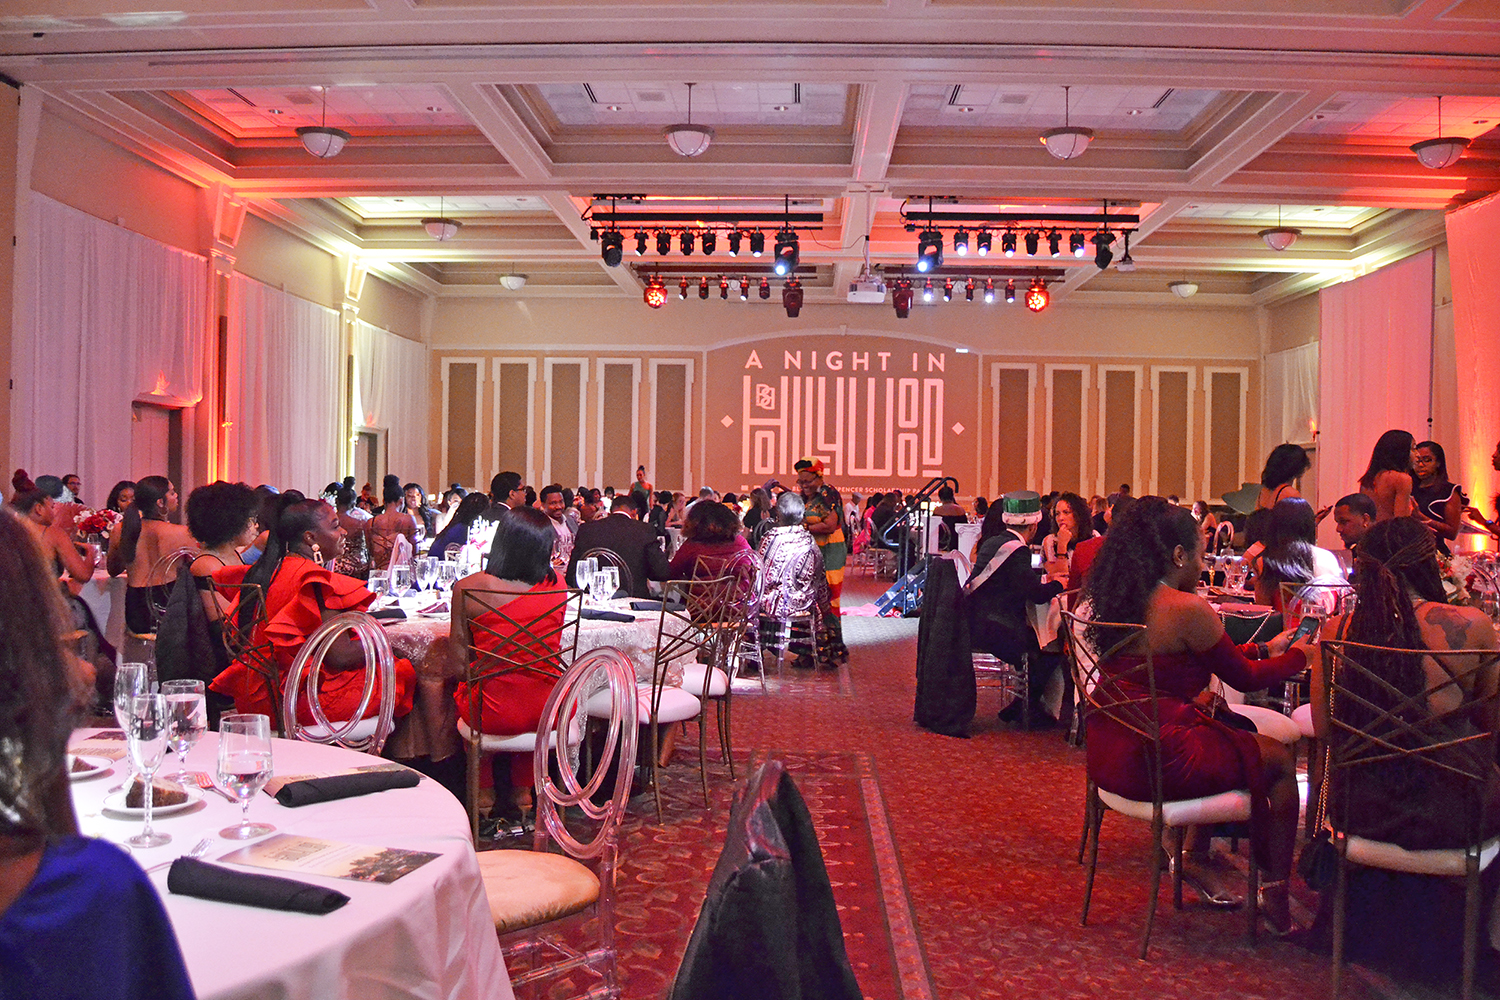 People in formal black tie seated at round tables in Baker Ballroom